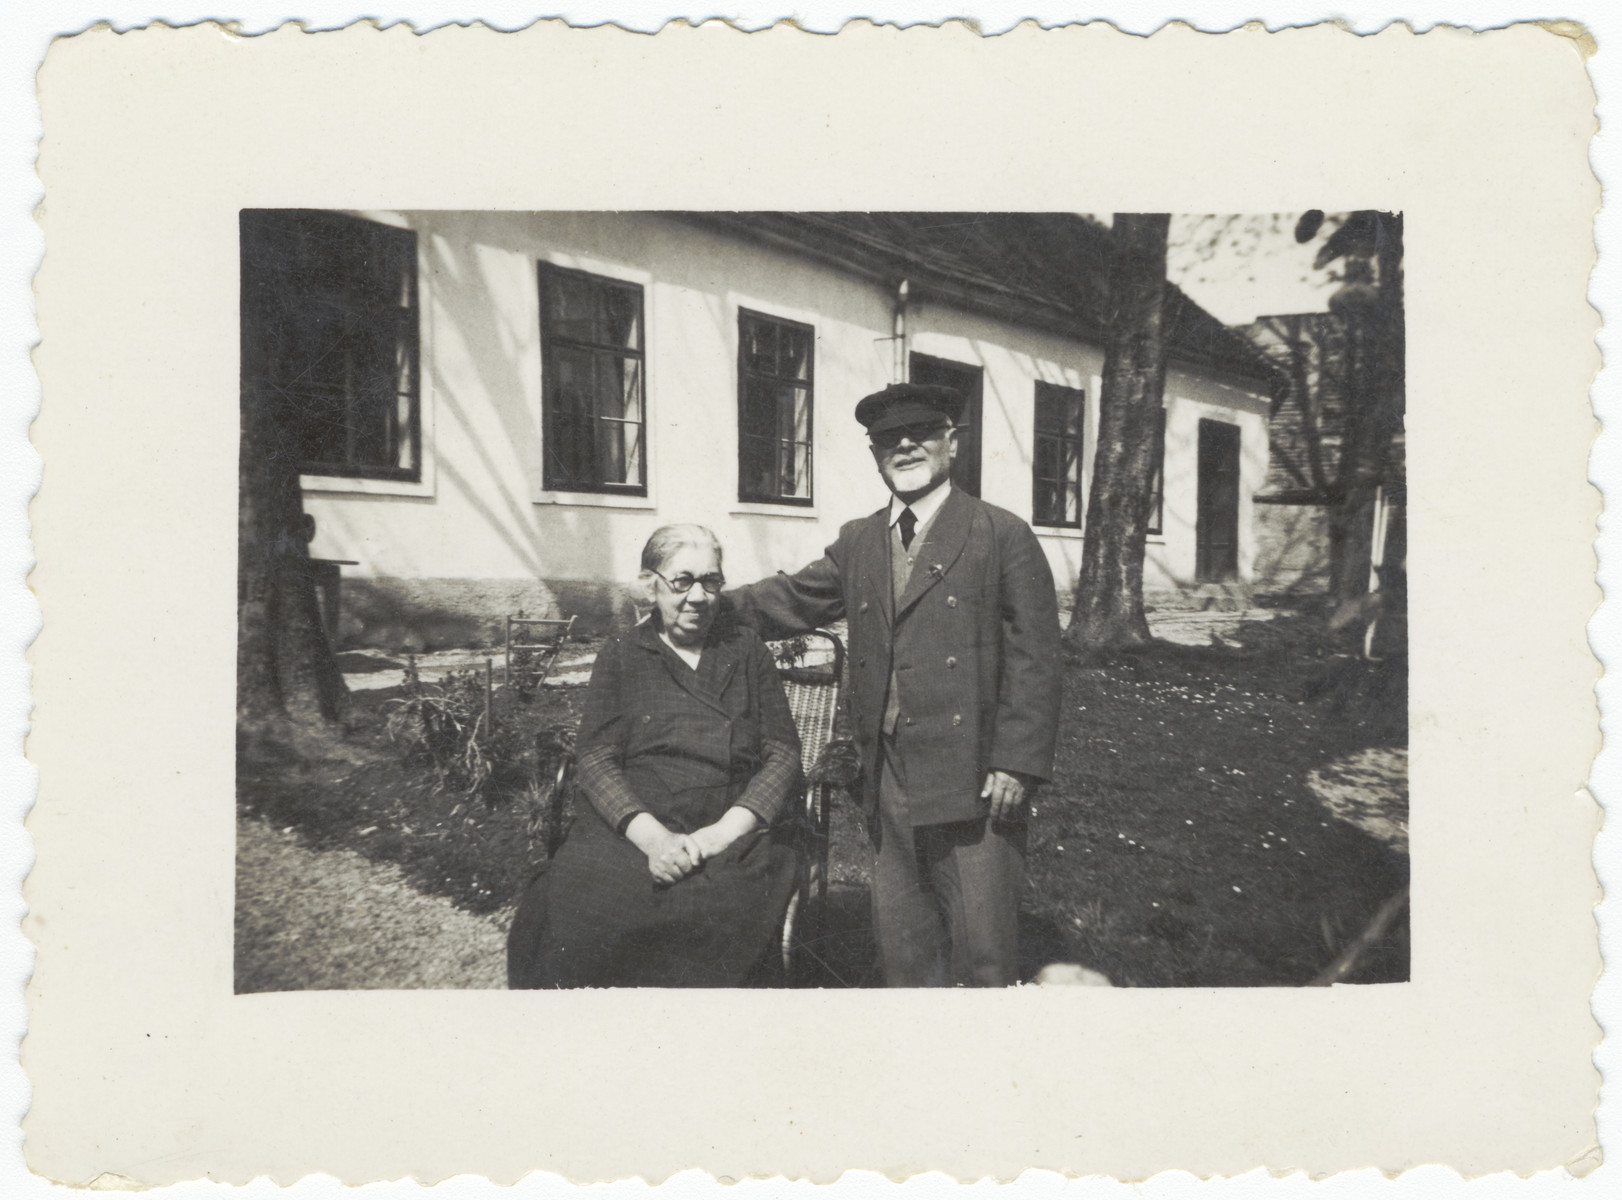 A rabbi and his wife pose in front of their home which also served as the town's synagogue.

Pictured are Rabbi Leopold and Katarina Deutsch.